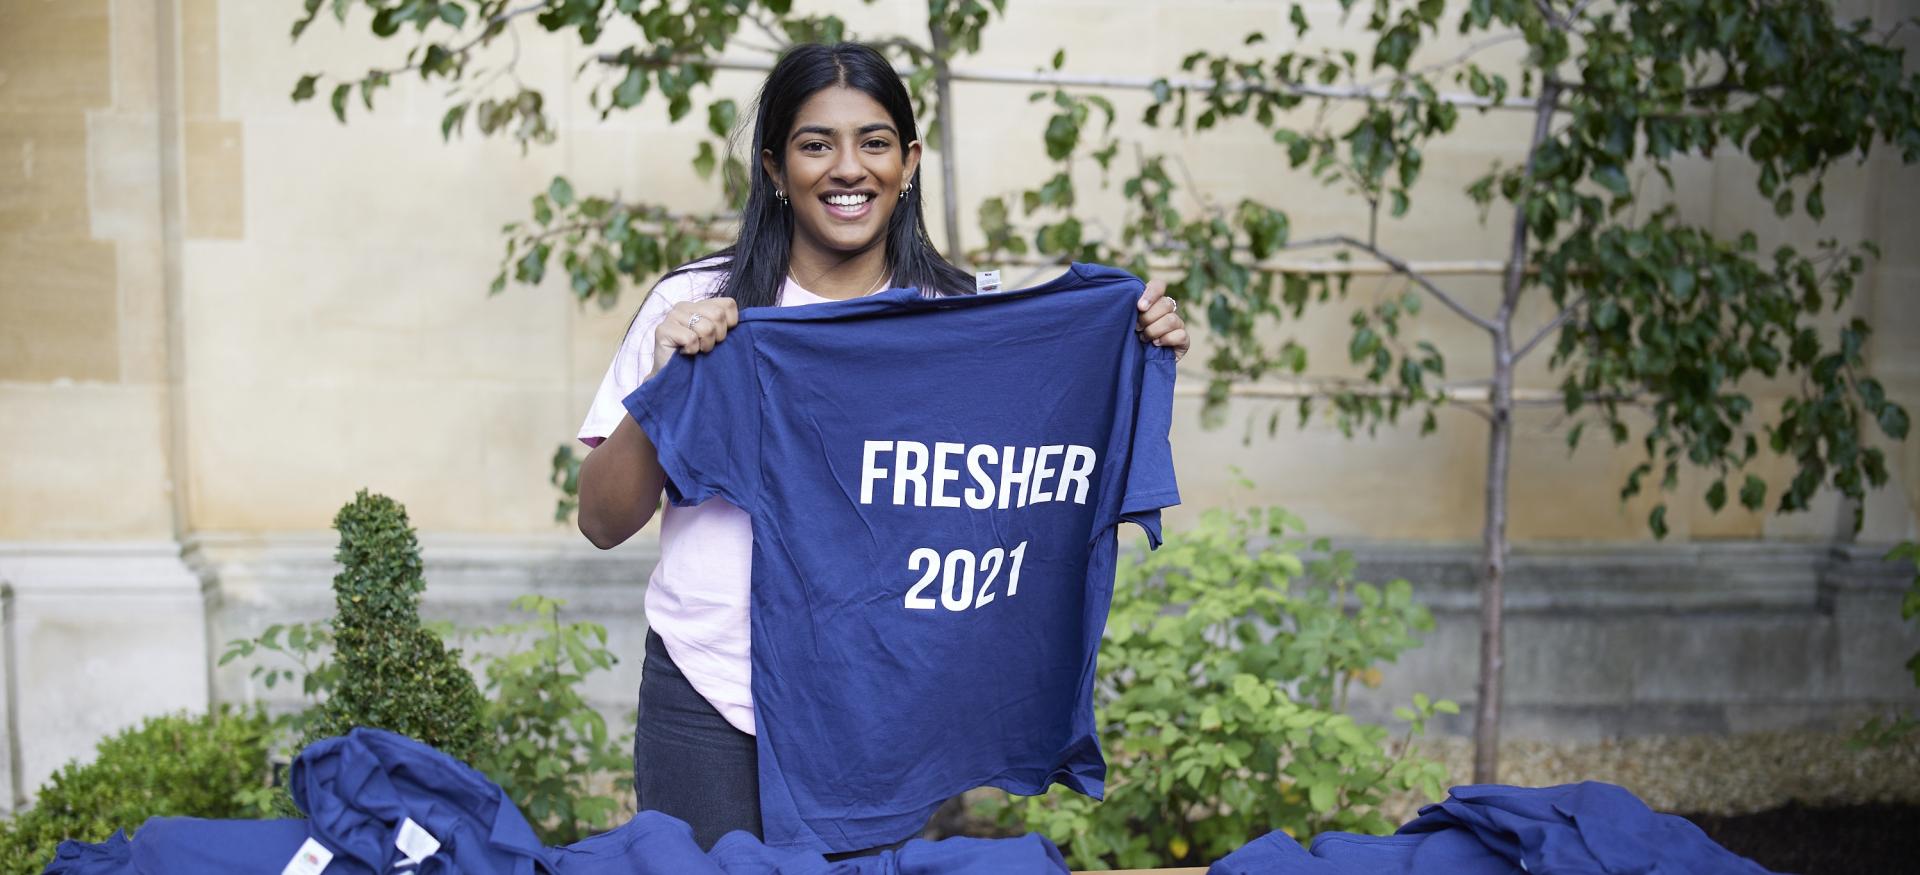 A female student stands holding a t-shirt that reads 'fresher 2021'.